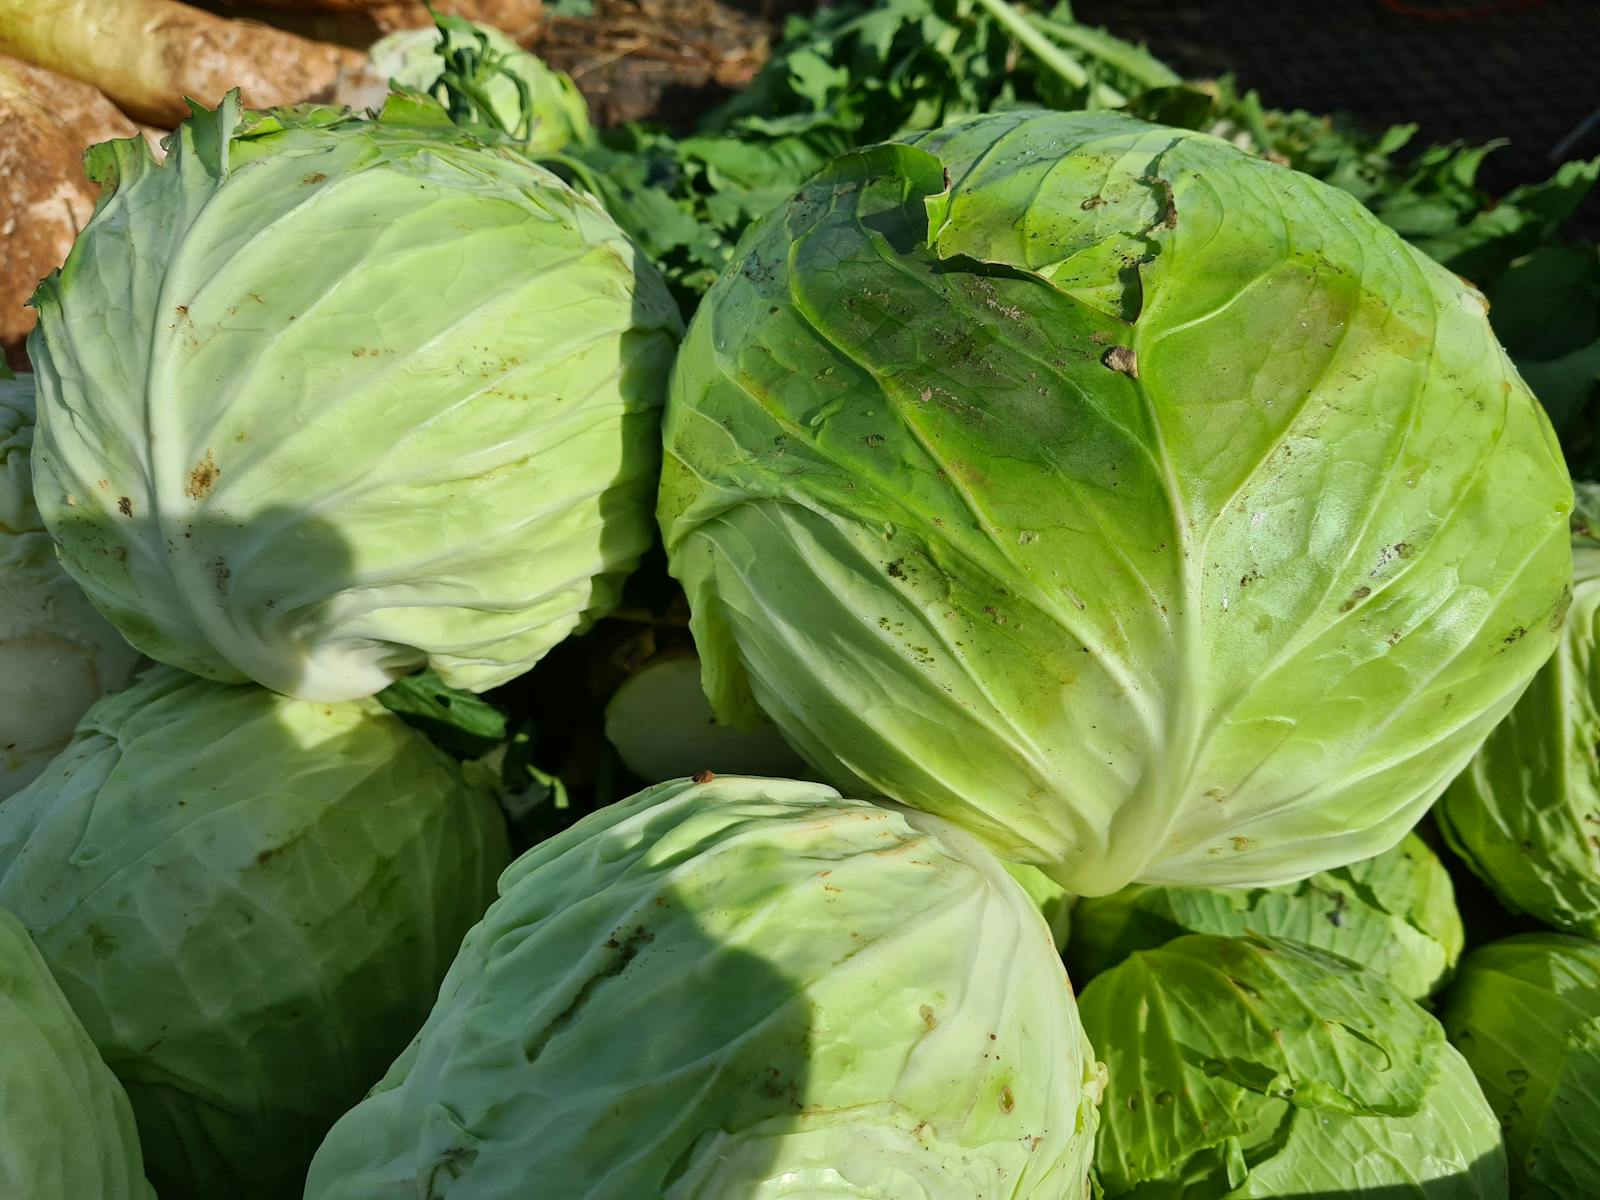 Farm harvest green cabbages